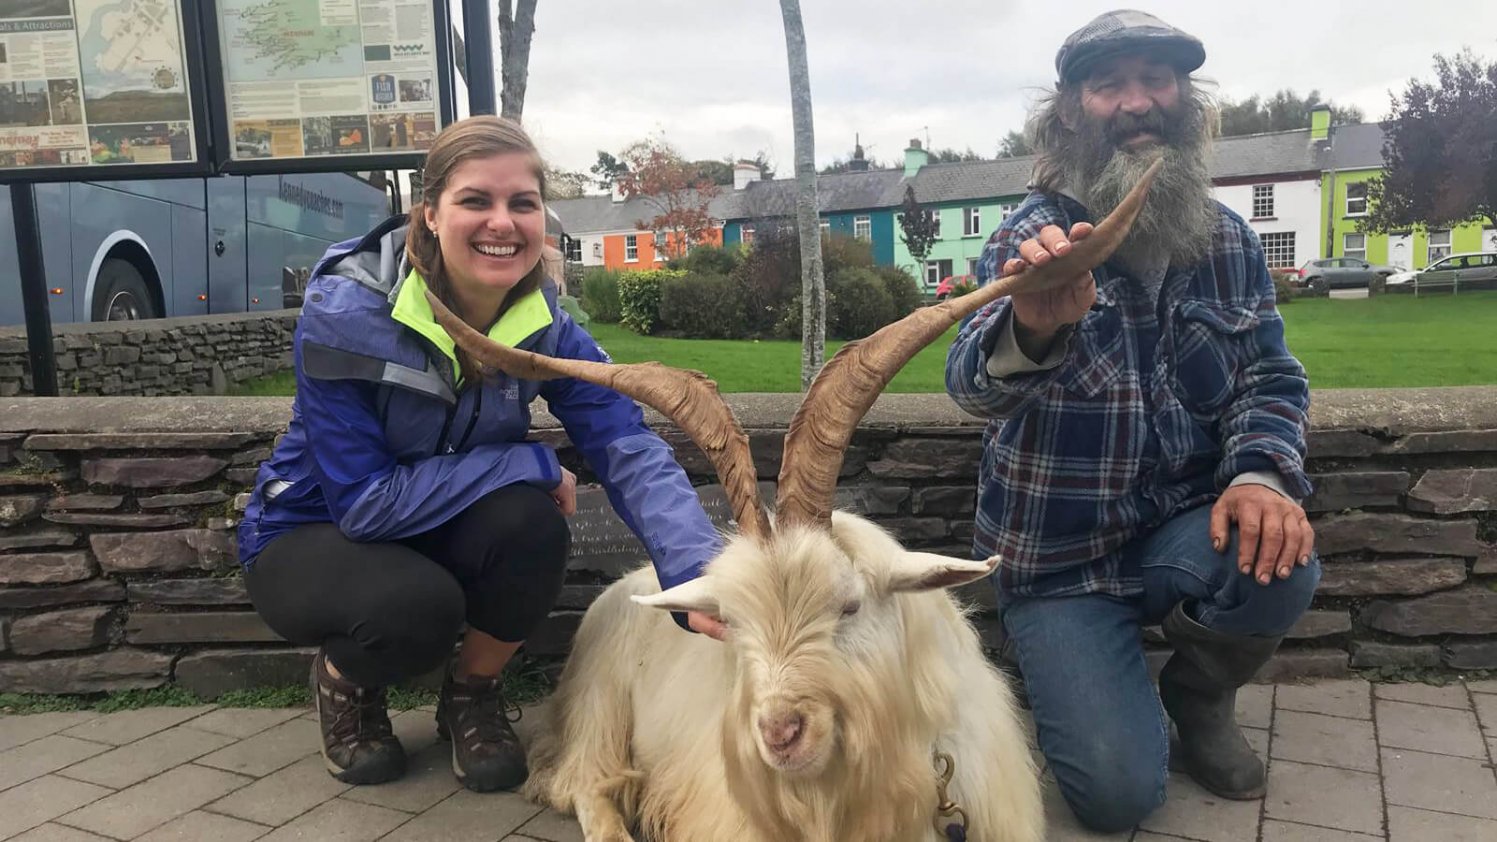 Vagabond Robin meets Steve the goat man of Sneem and Puck, his goat, on her small group tour of Ireland